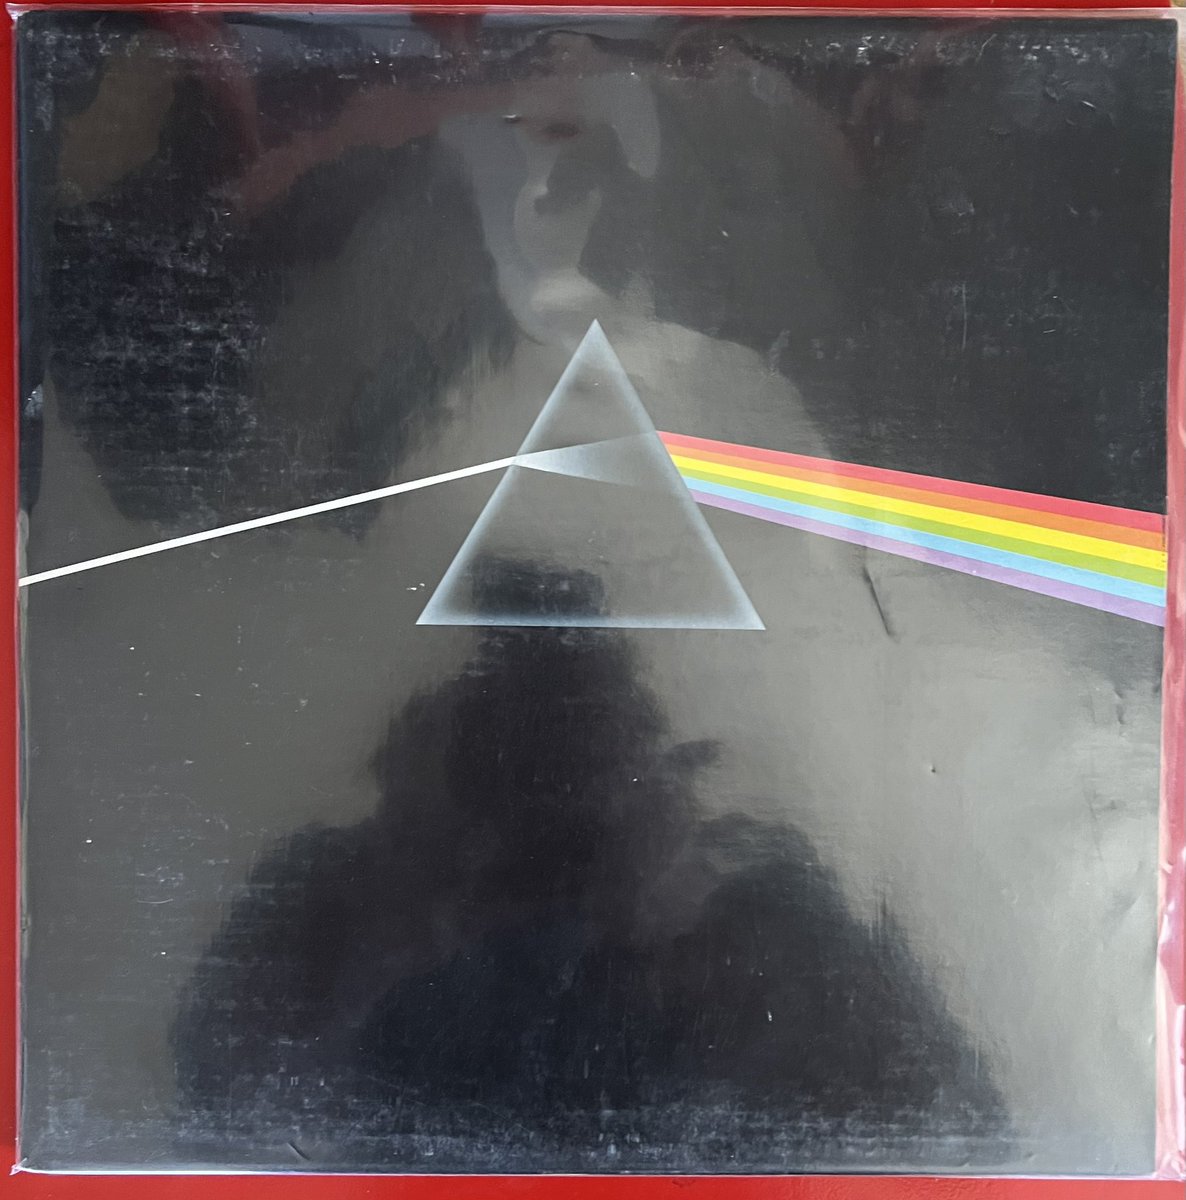 Perfect 🎸🎸🎸 🥁🥁🥁@pinkfloyd #vinyl lprecord.eth for @ENSMaxisNFT #metaupdate LP record has a wiki page. Definitely justified my investment #ETH #ENS #ENSMaxis ##ENSMaxisNFT @ensdomains #ensdomains #recordcollection #vinylcollection #vinylcommunity en.wikipedia.org/wiki/LP_record